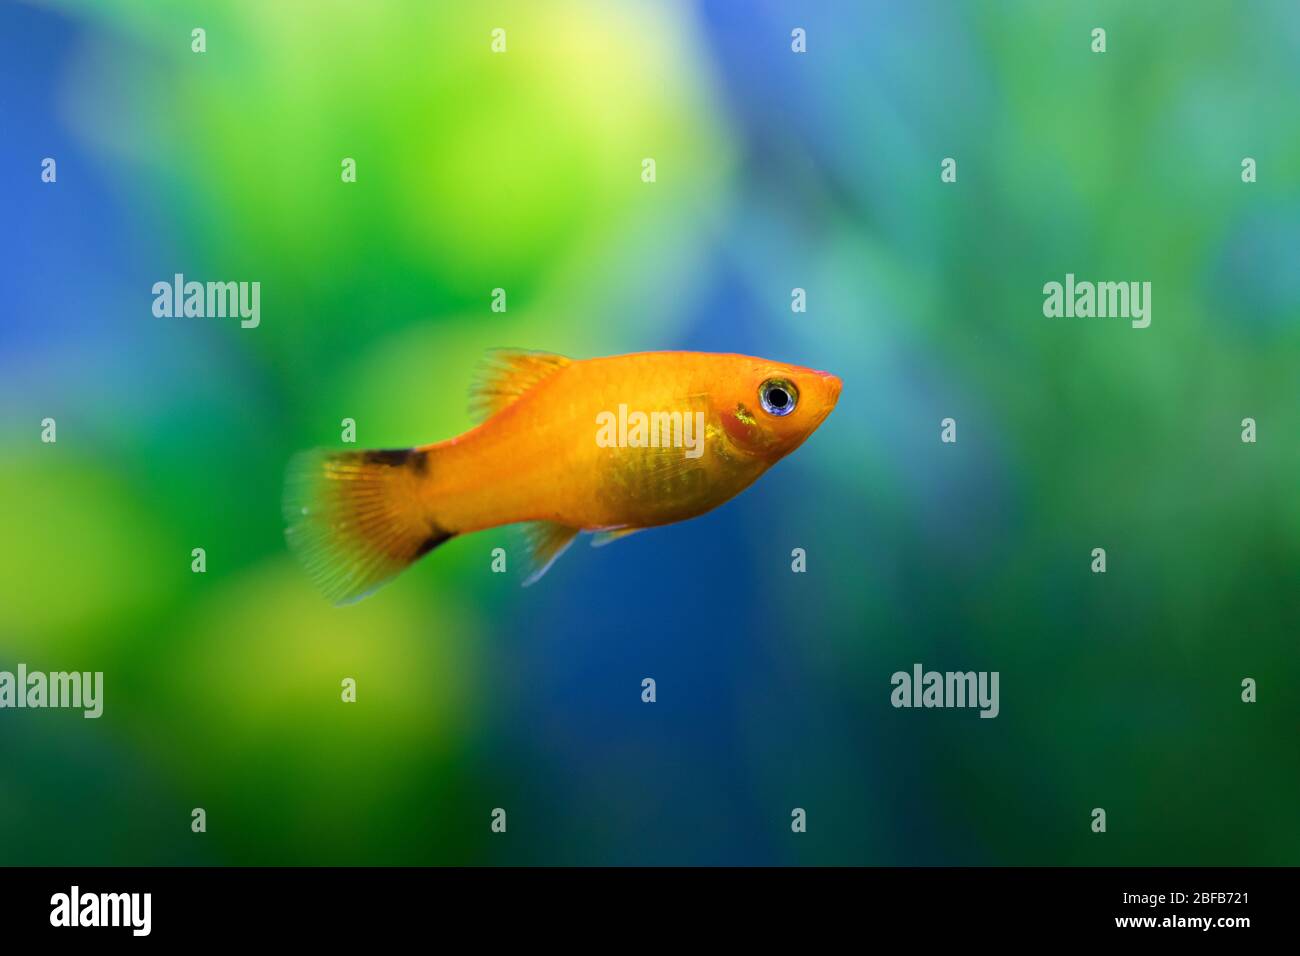 Close up of Orange color Platy fish against green and blue blurred background Stock Photo